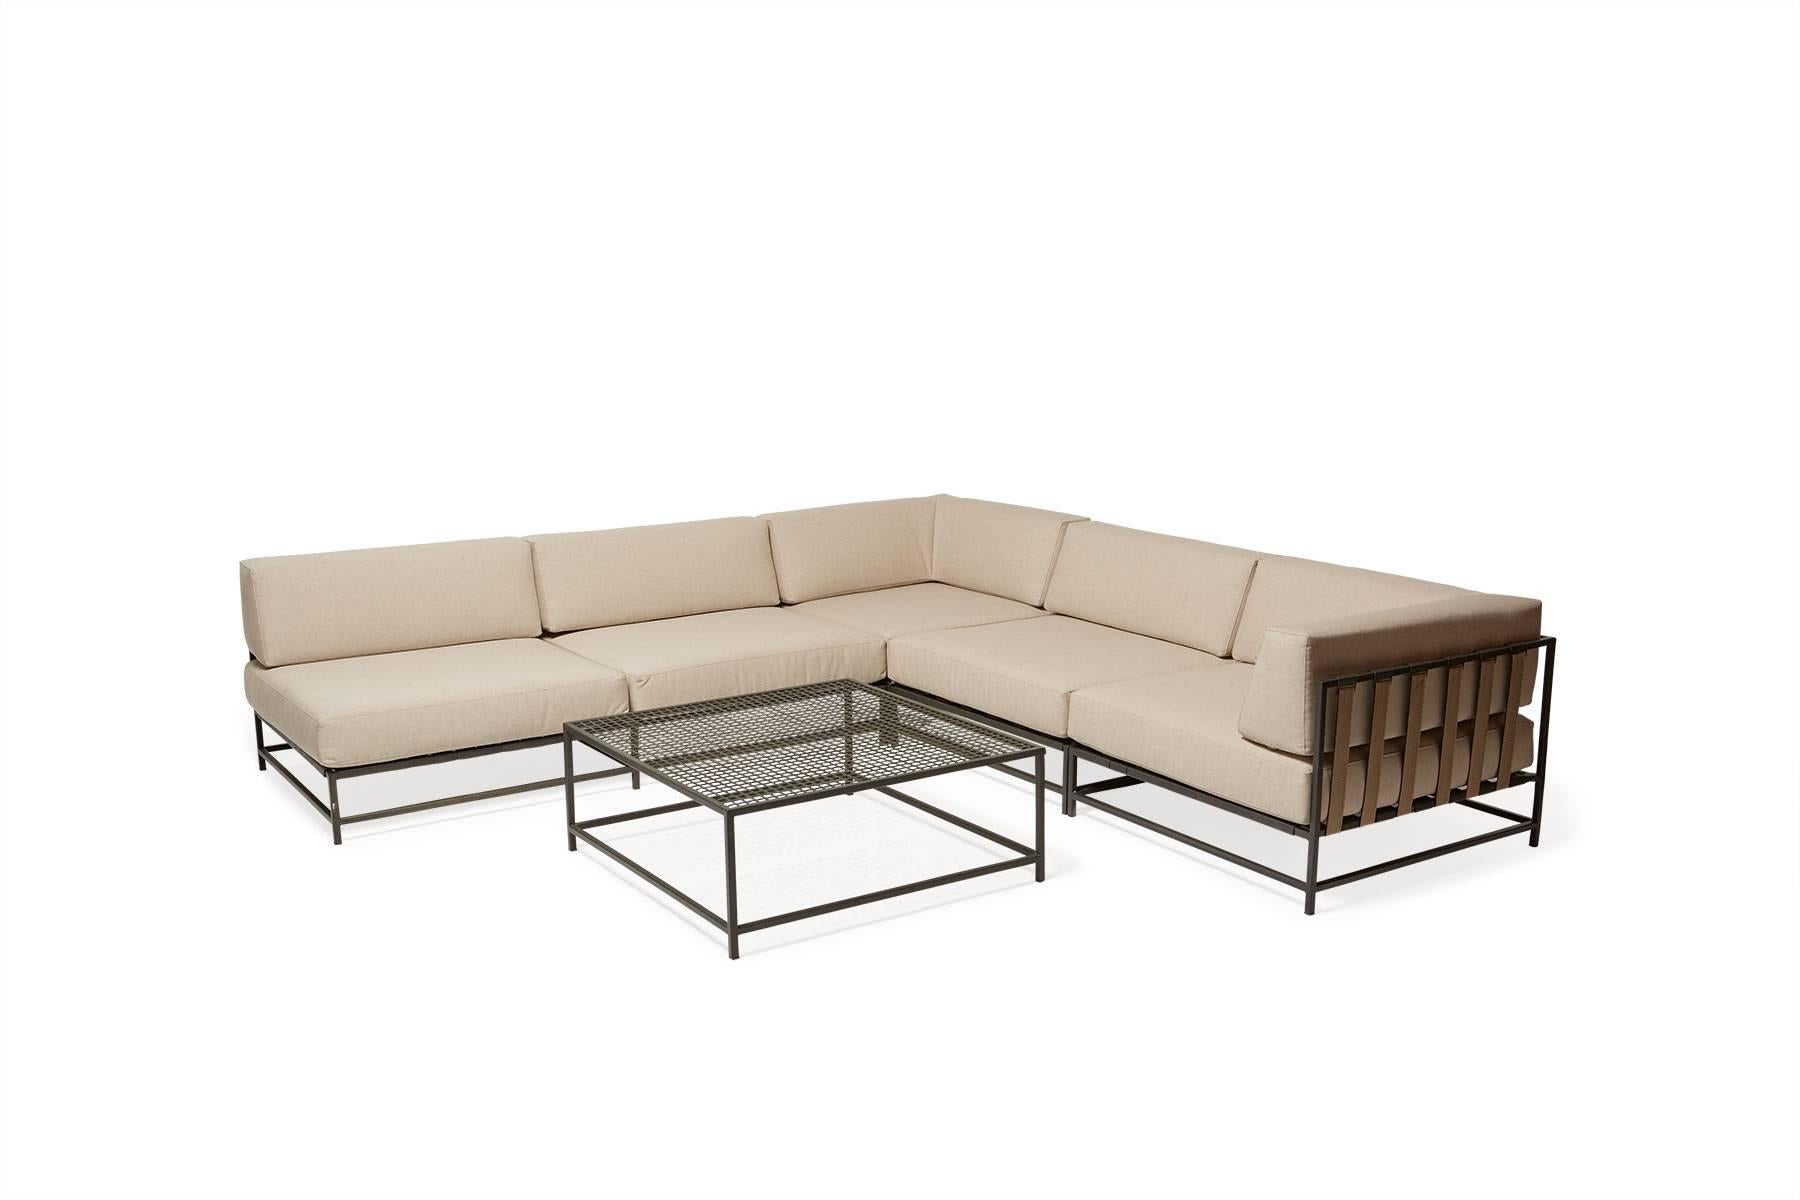 American Outdoor Cream and Charcoal Sectional For Sale